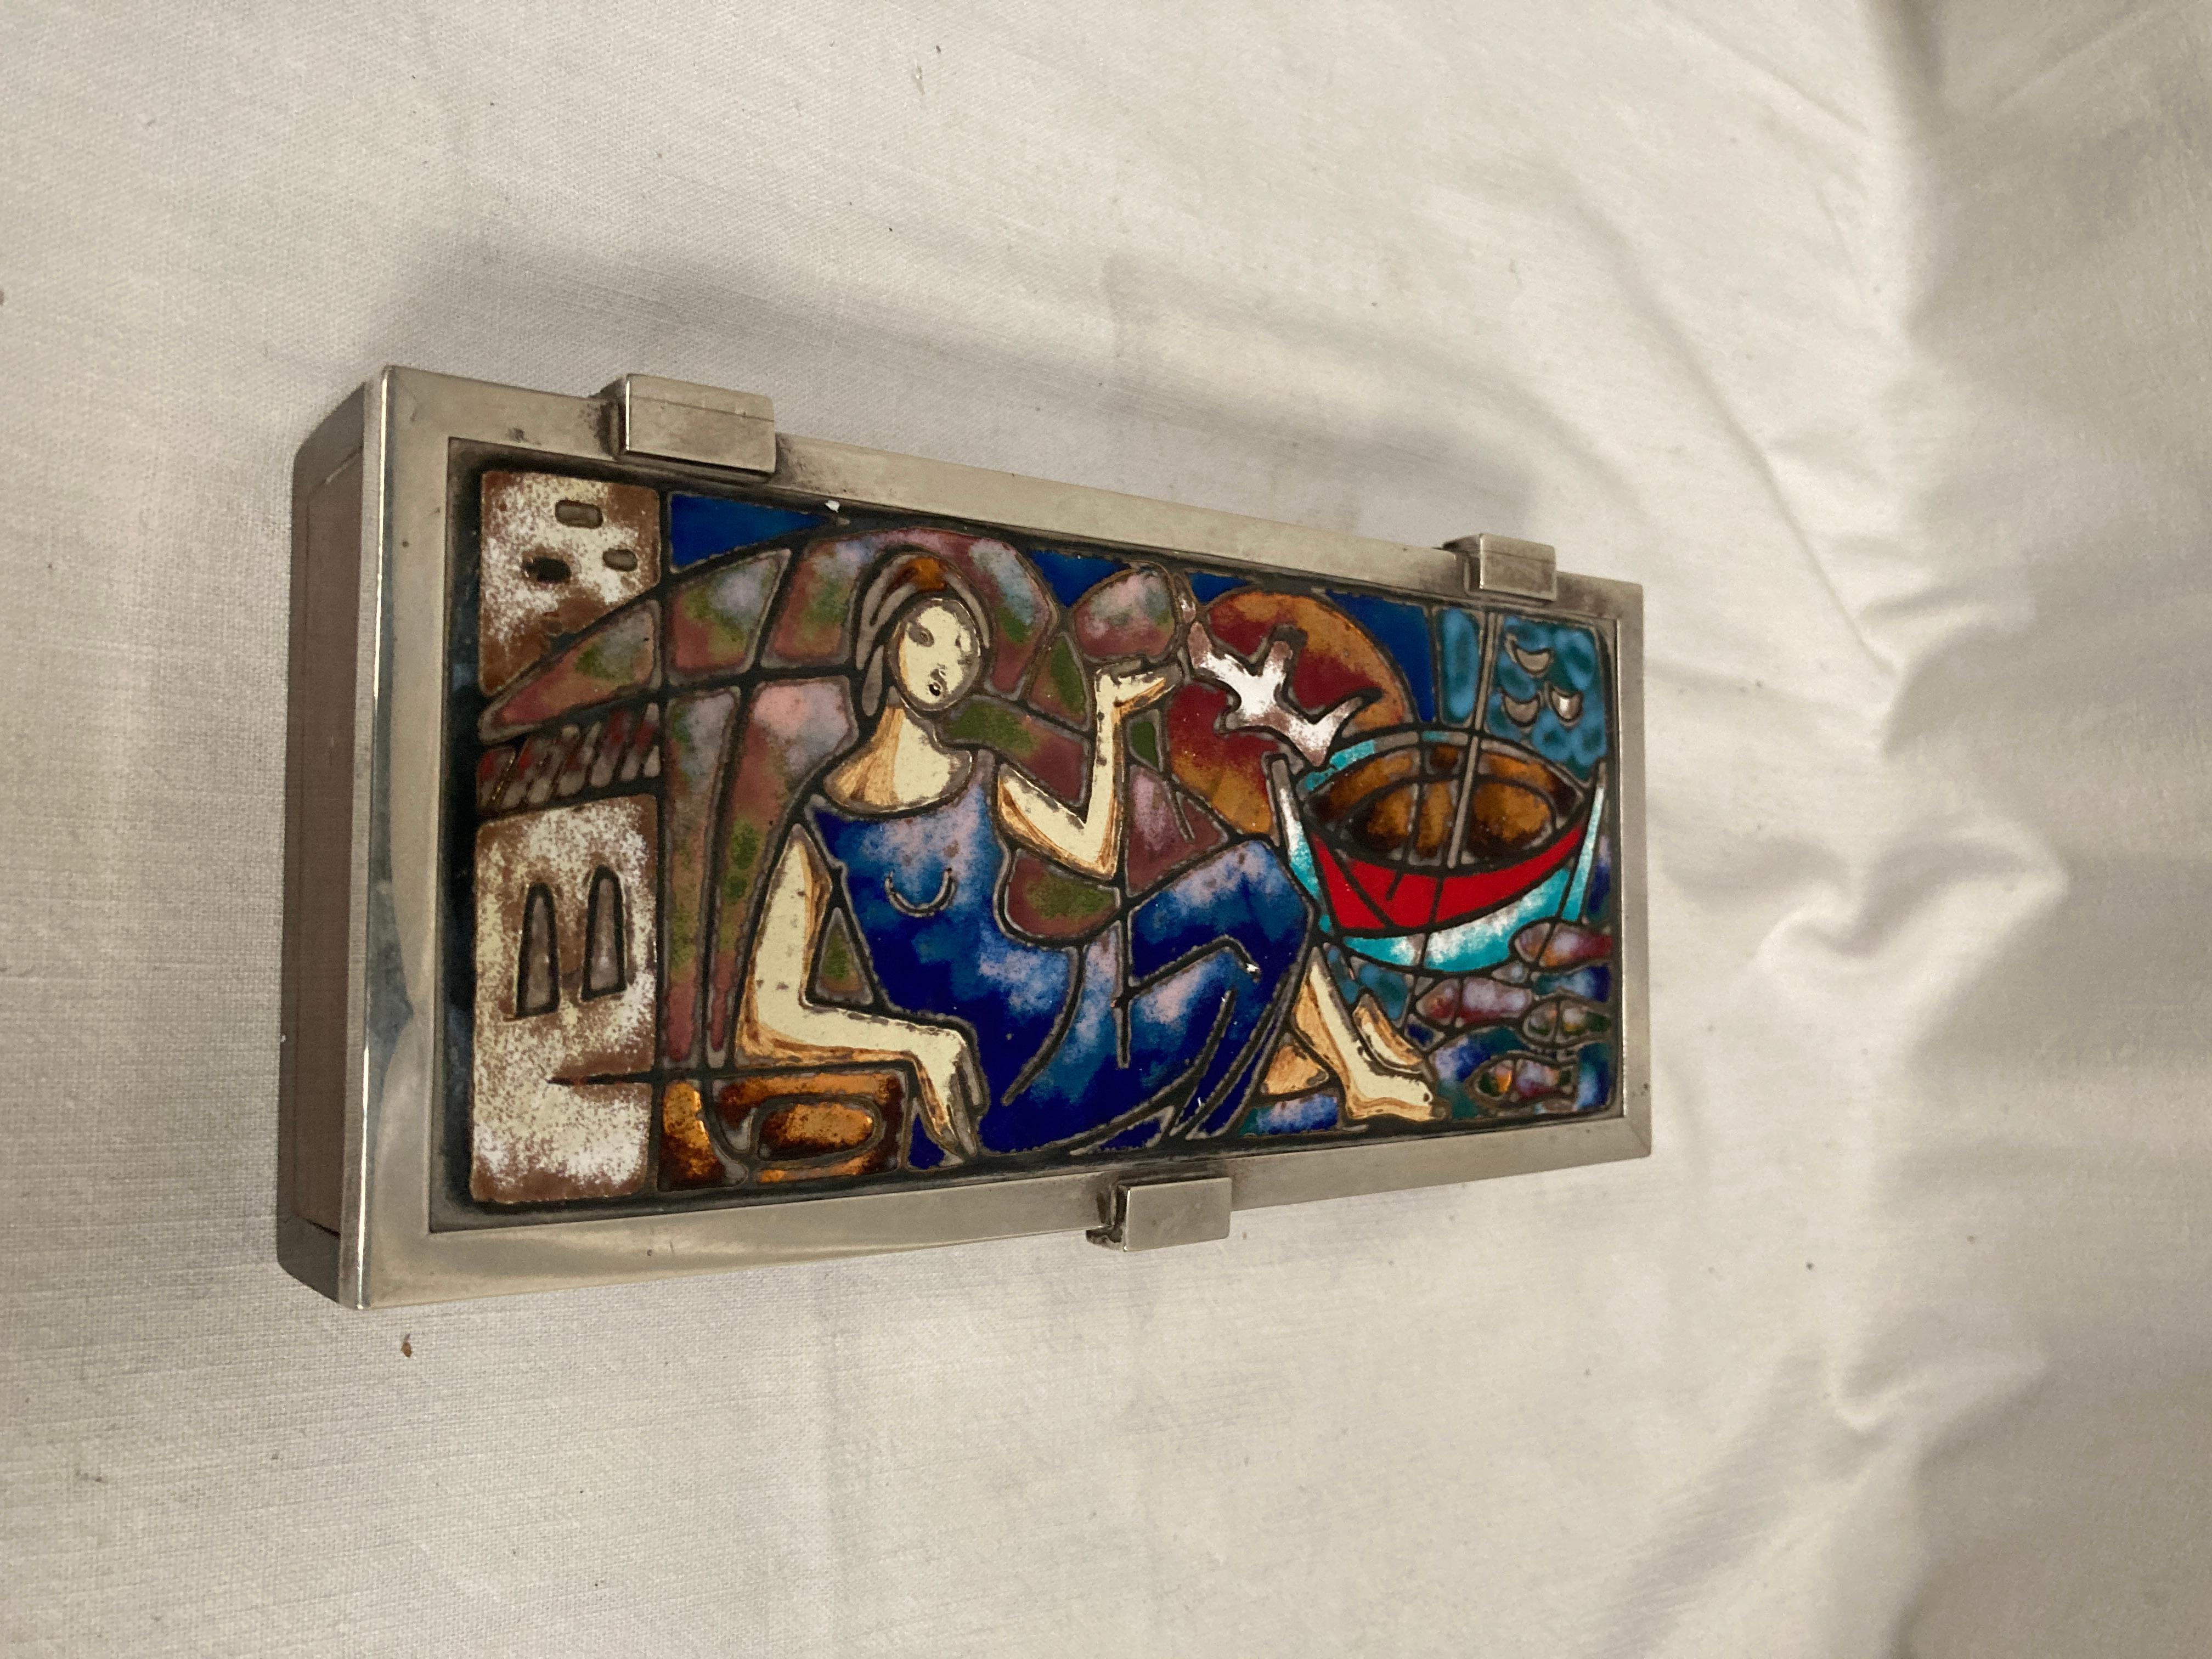 1960's enameled silver an exotic wood boxe 
Very interesting work
Great quality
Silver stamps
